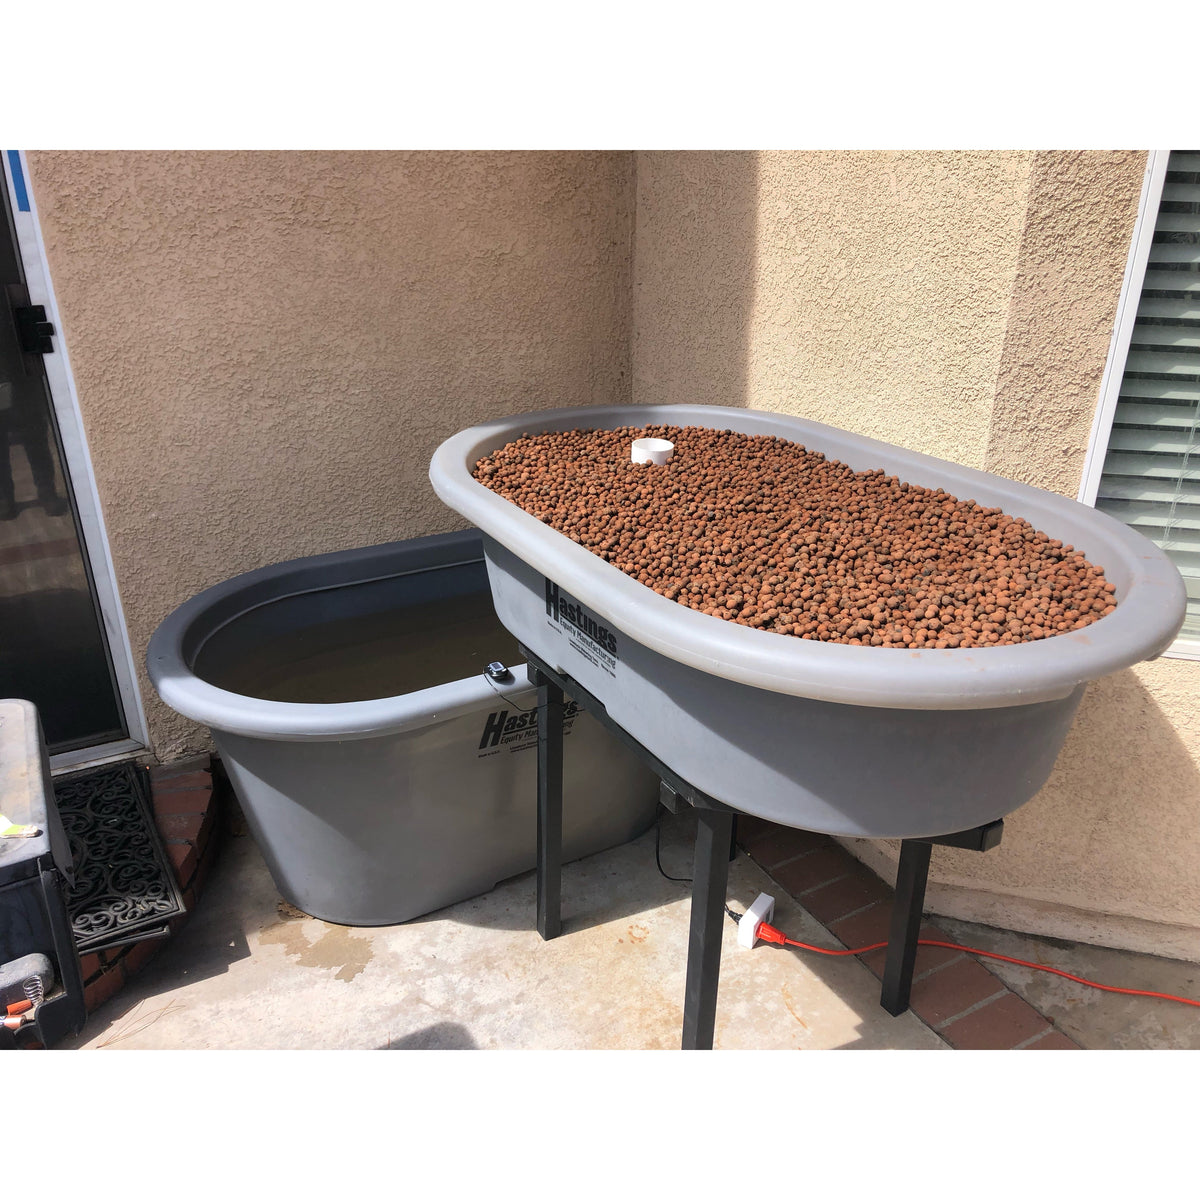 A Go Green Aquaponics System with a lot of gravel in it.